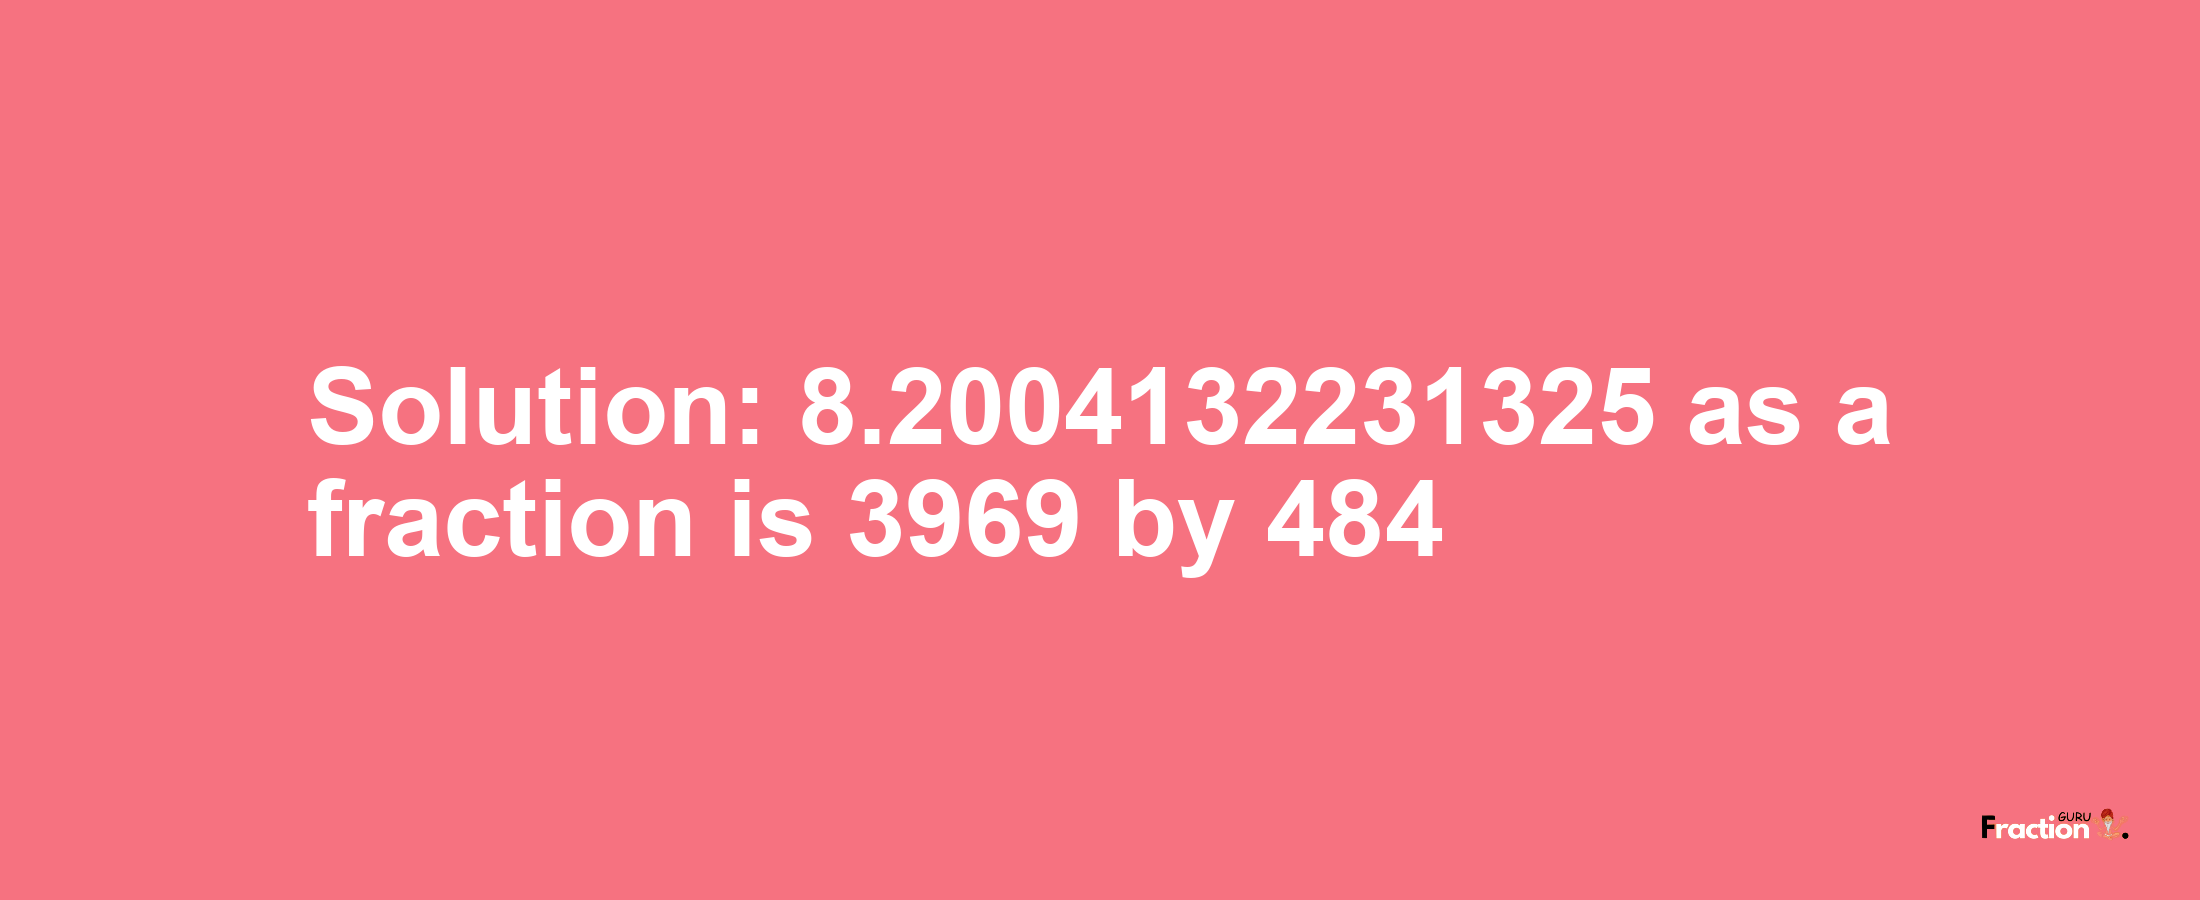 Solution:8.2004132231325 as a fraction is 3969/484